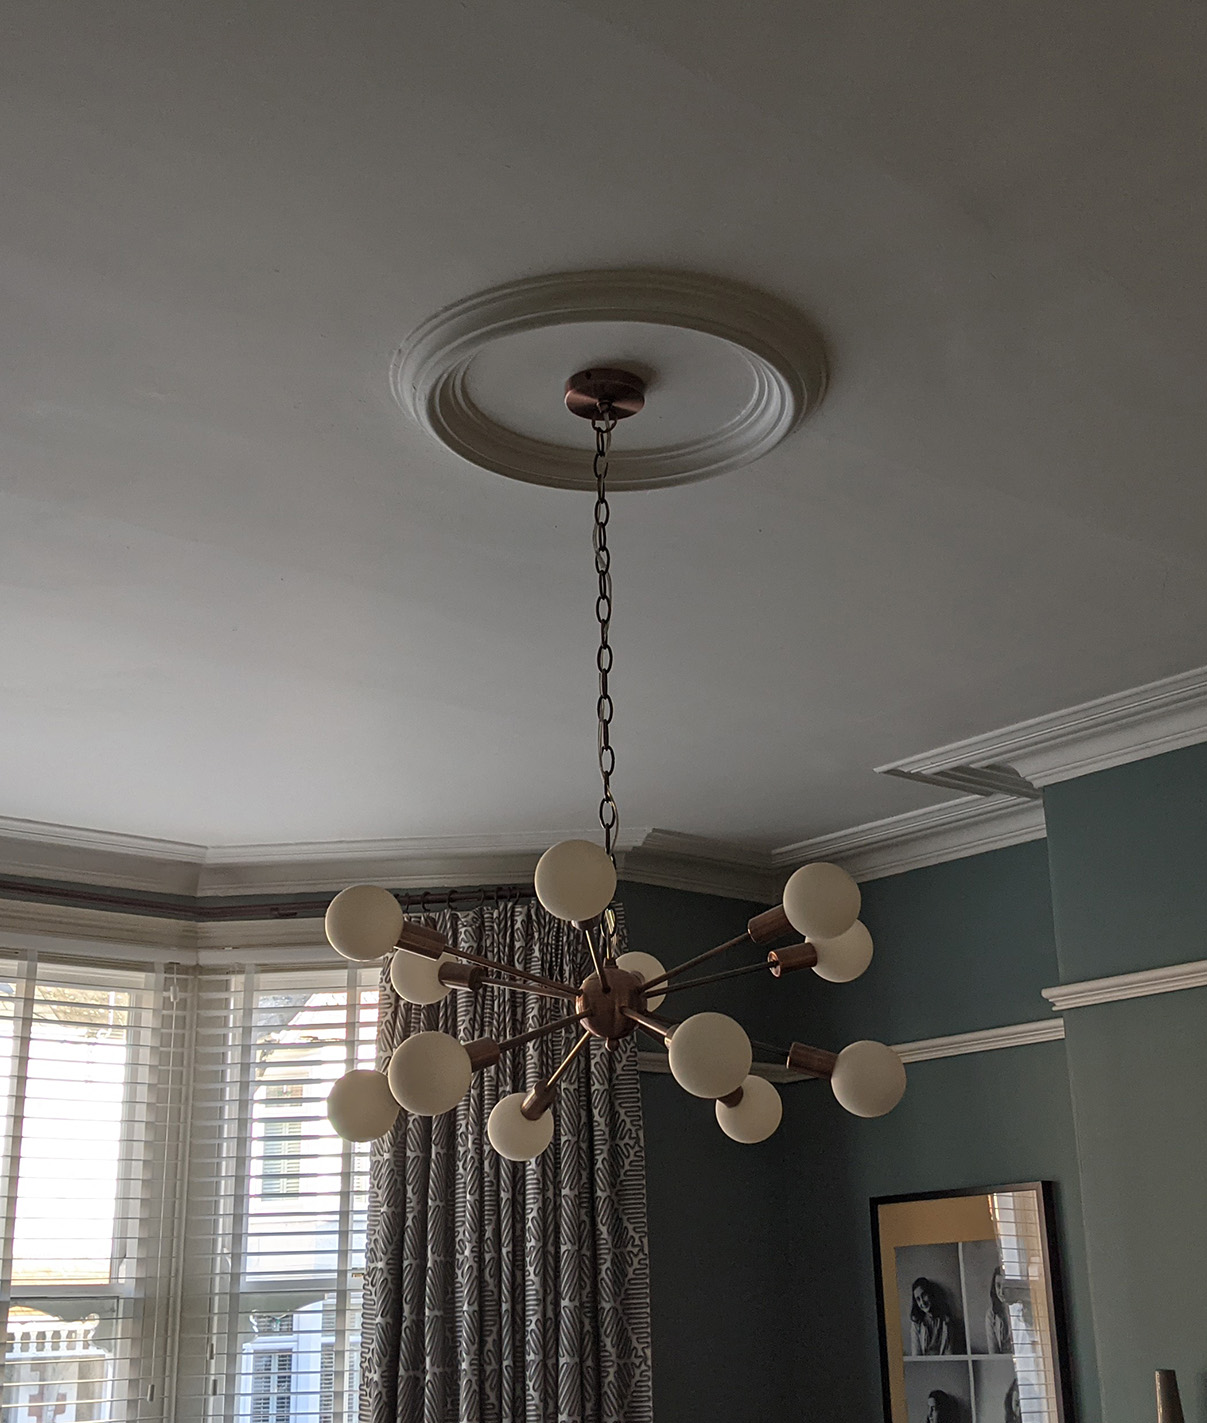 A before photo showing the ceiling light on a white ceiling.